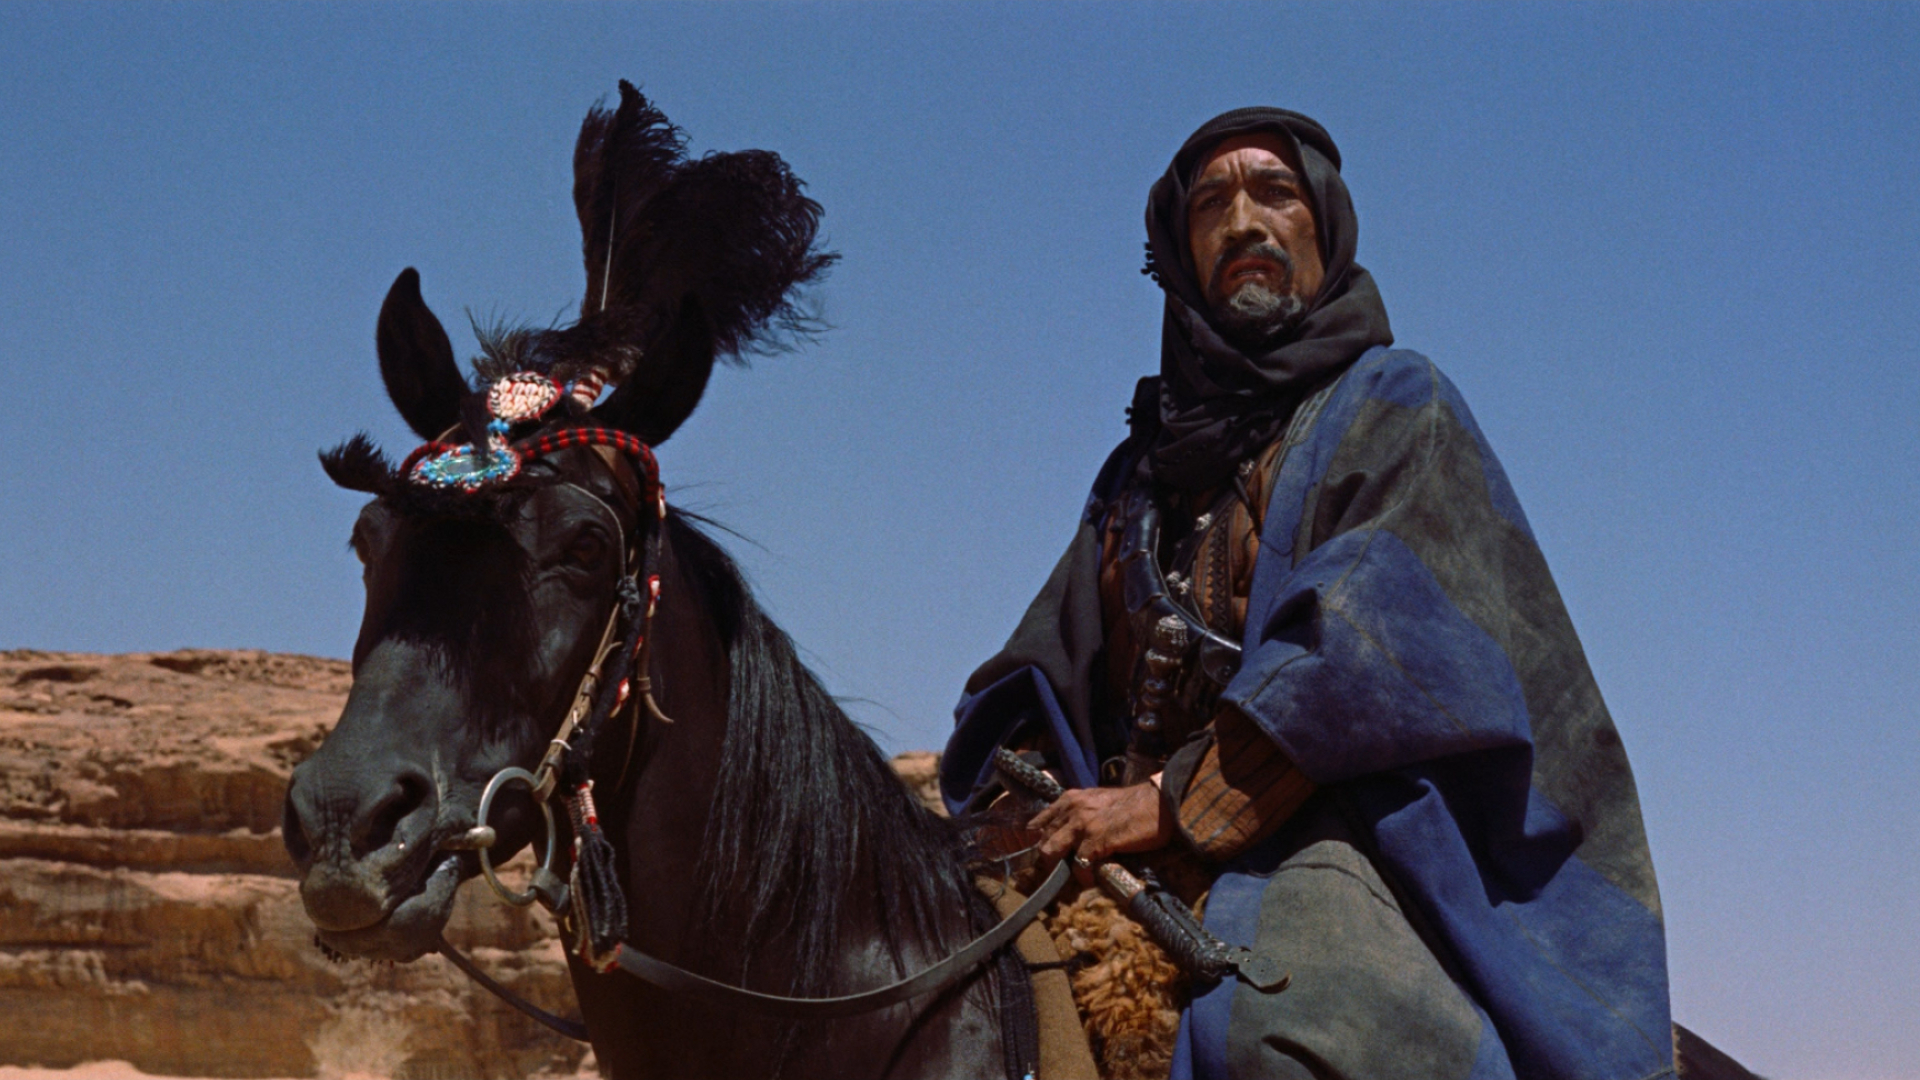 Lawrence of Arabia: Anthony Quinn as Auda abu Tayi, The leader of a Huwaytat tribe of Bedouin Arabs. 1920x1080 Full HD Background.